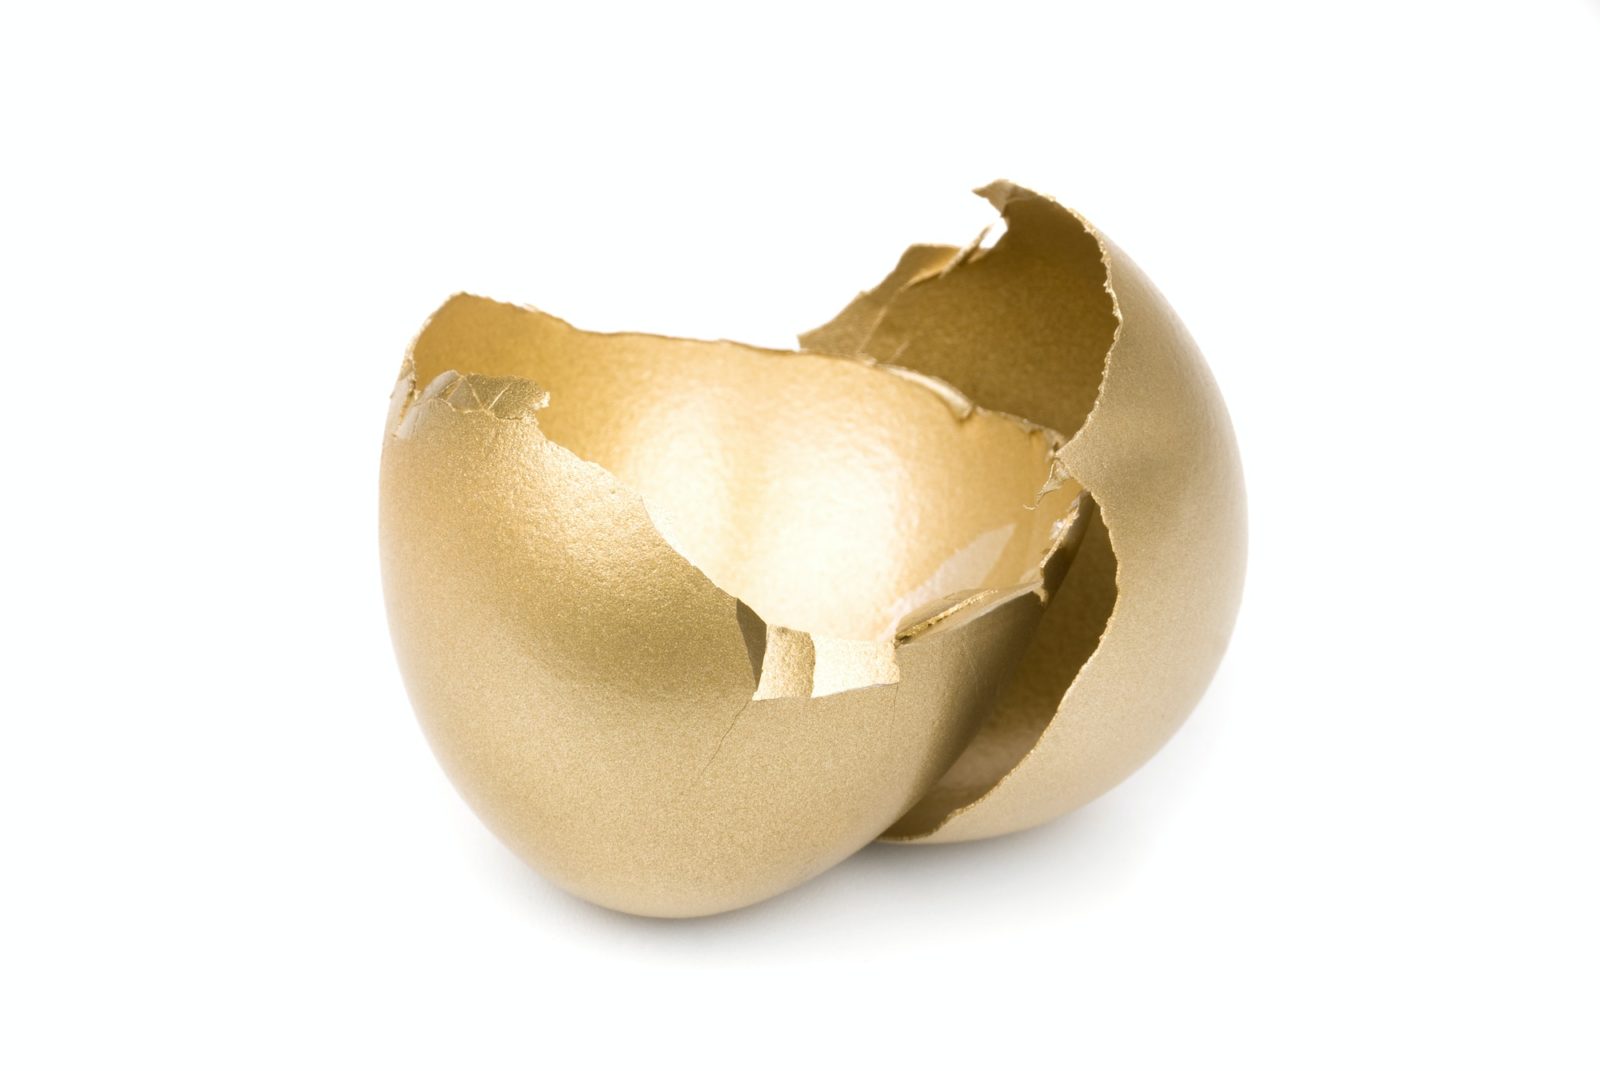 6 May 2021 | Don’t wait to snag these three golden eggs for your basket of stocks